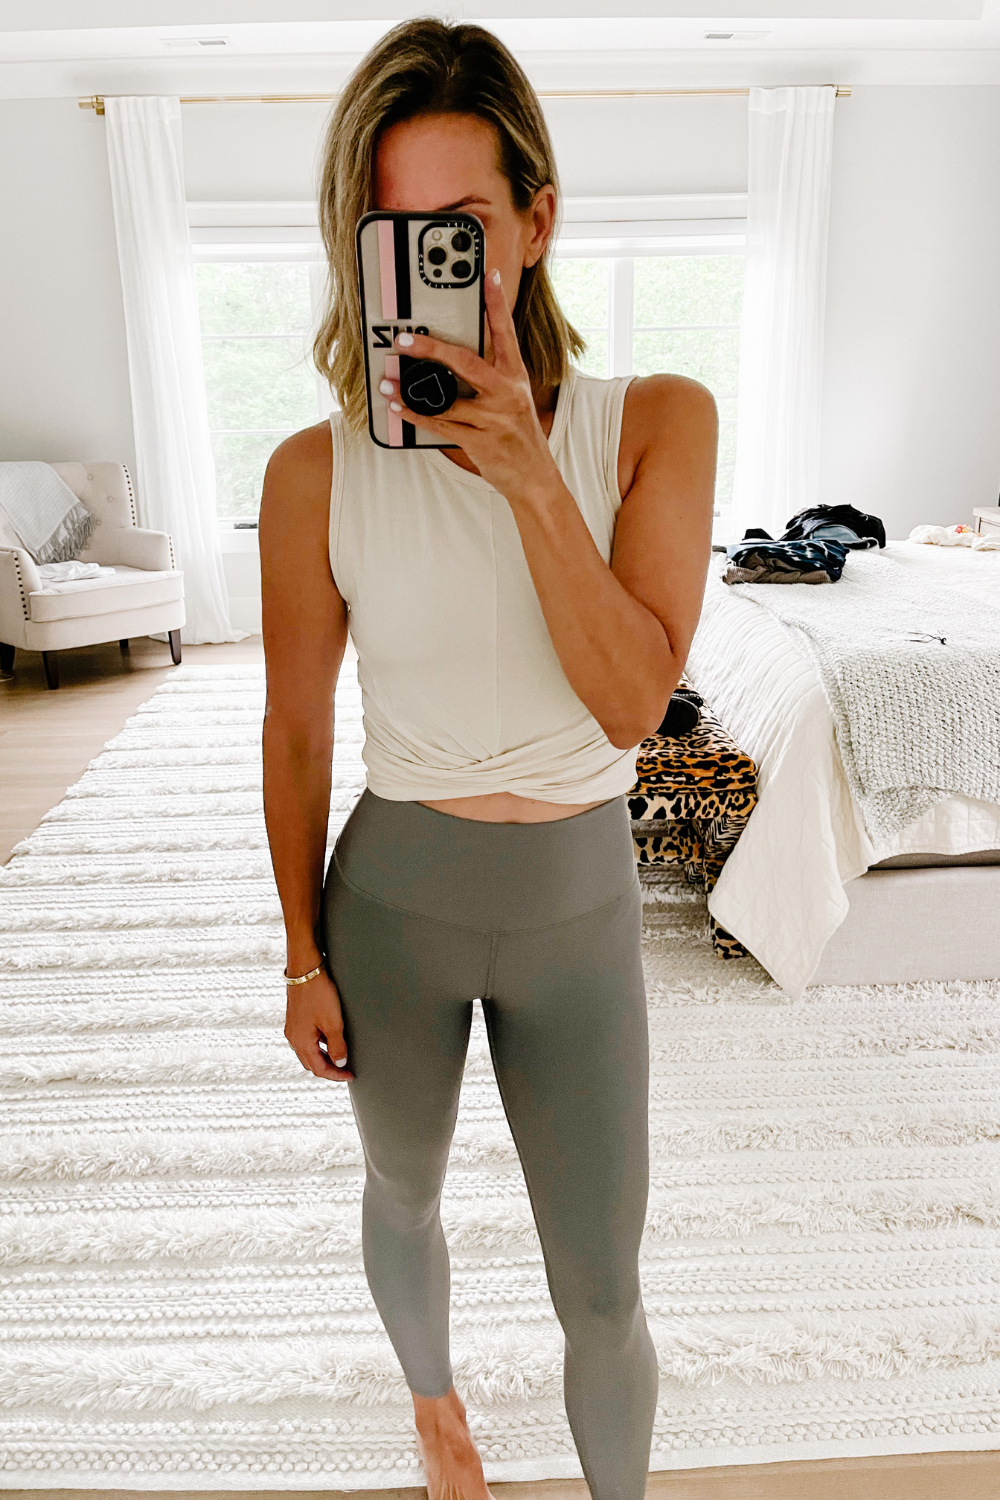 NORDSTROM ANNIVERSARY SALE: Alo sports bra and leggings and tank